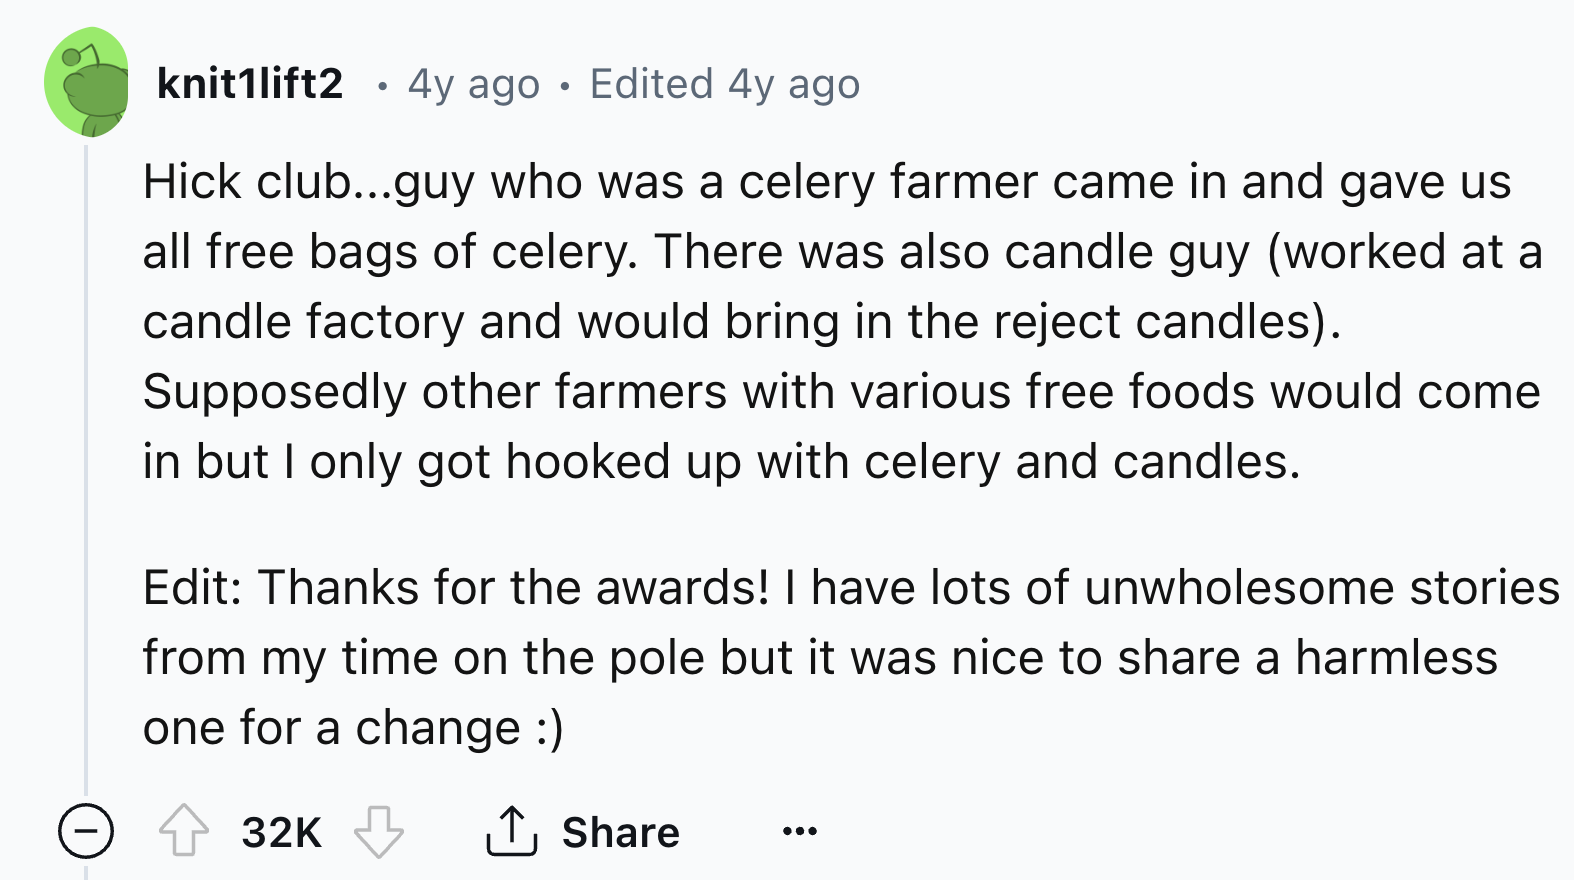 circle - knit1lift2 4y ago Edited 4y ago Hick club...guy who was a celery farmer came in and gave us all free bags of celery. There was also candle guy worked at a candle factory and would bring in the reject candles. Supposedly other farmers with various